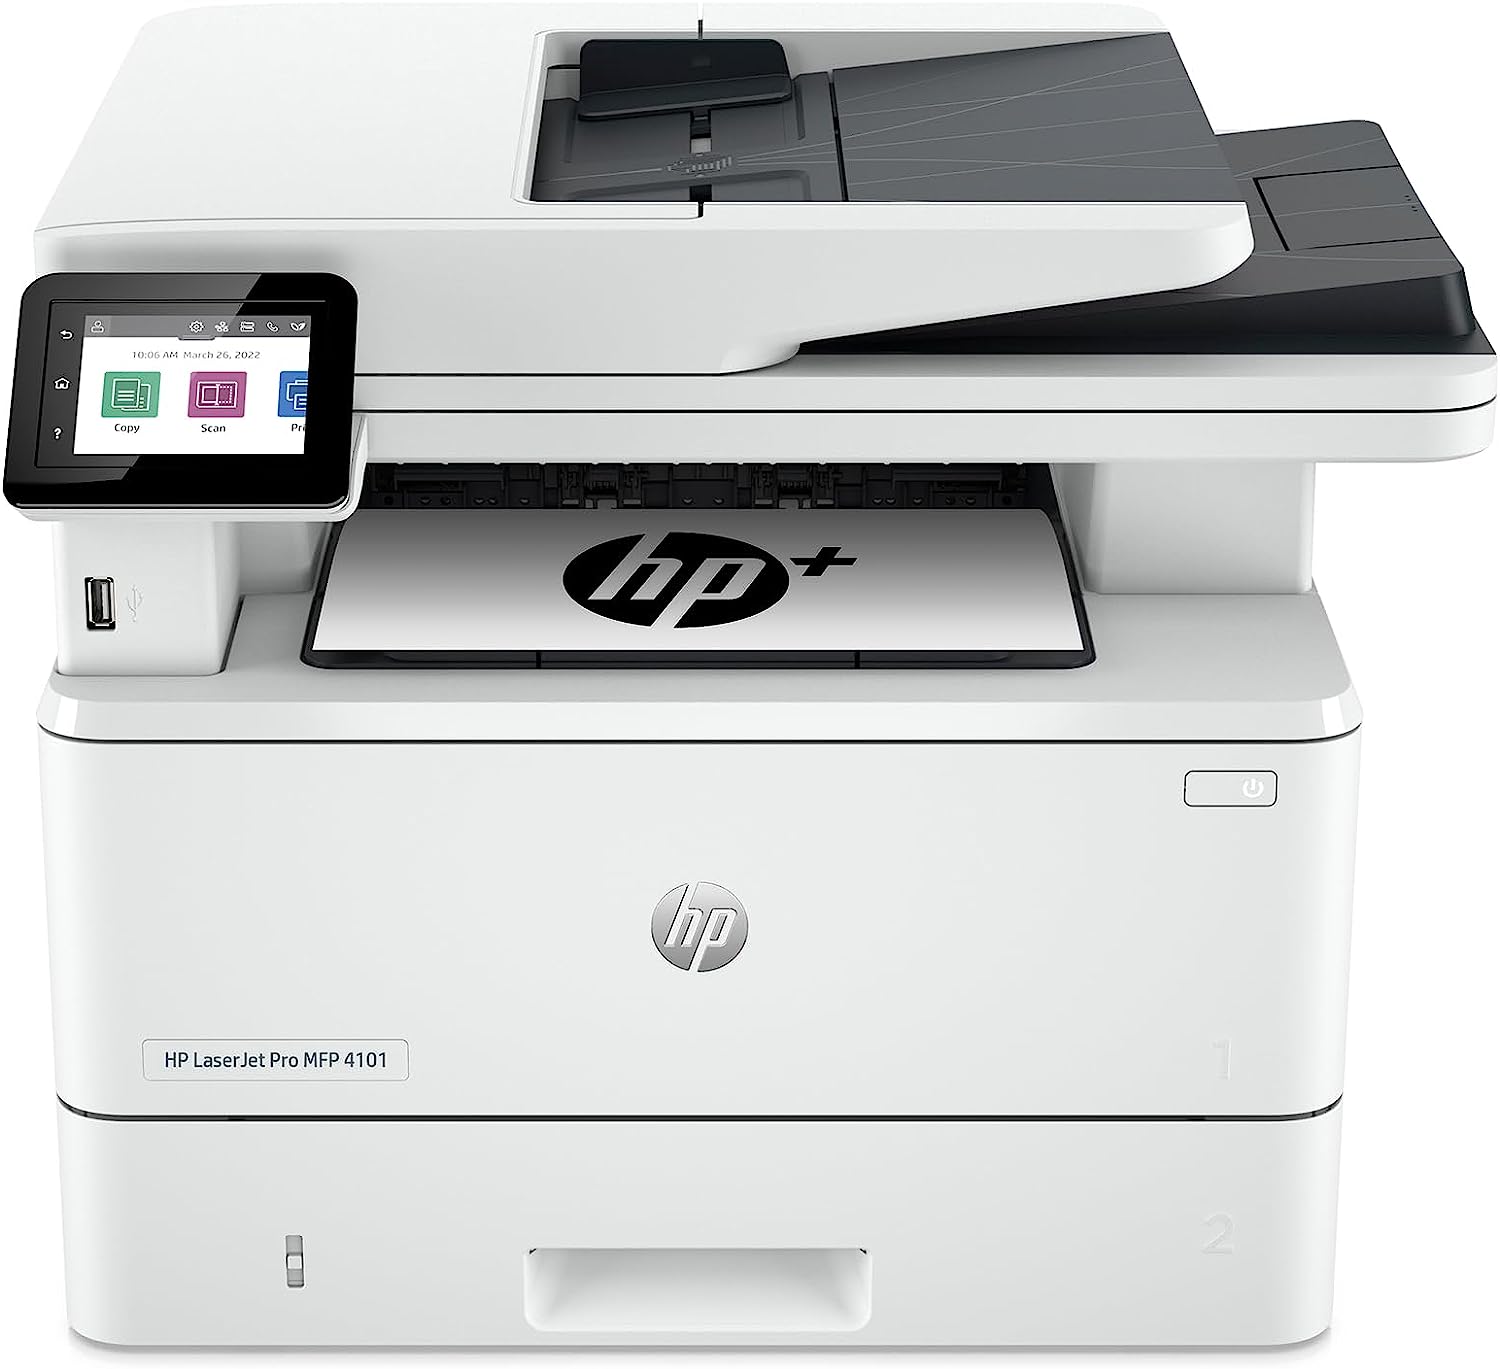 mfp printer for small office review